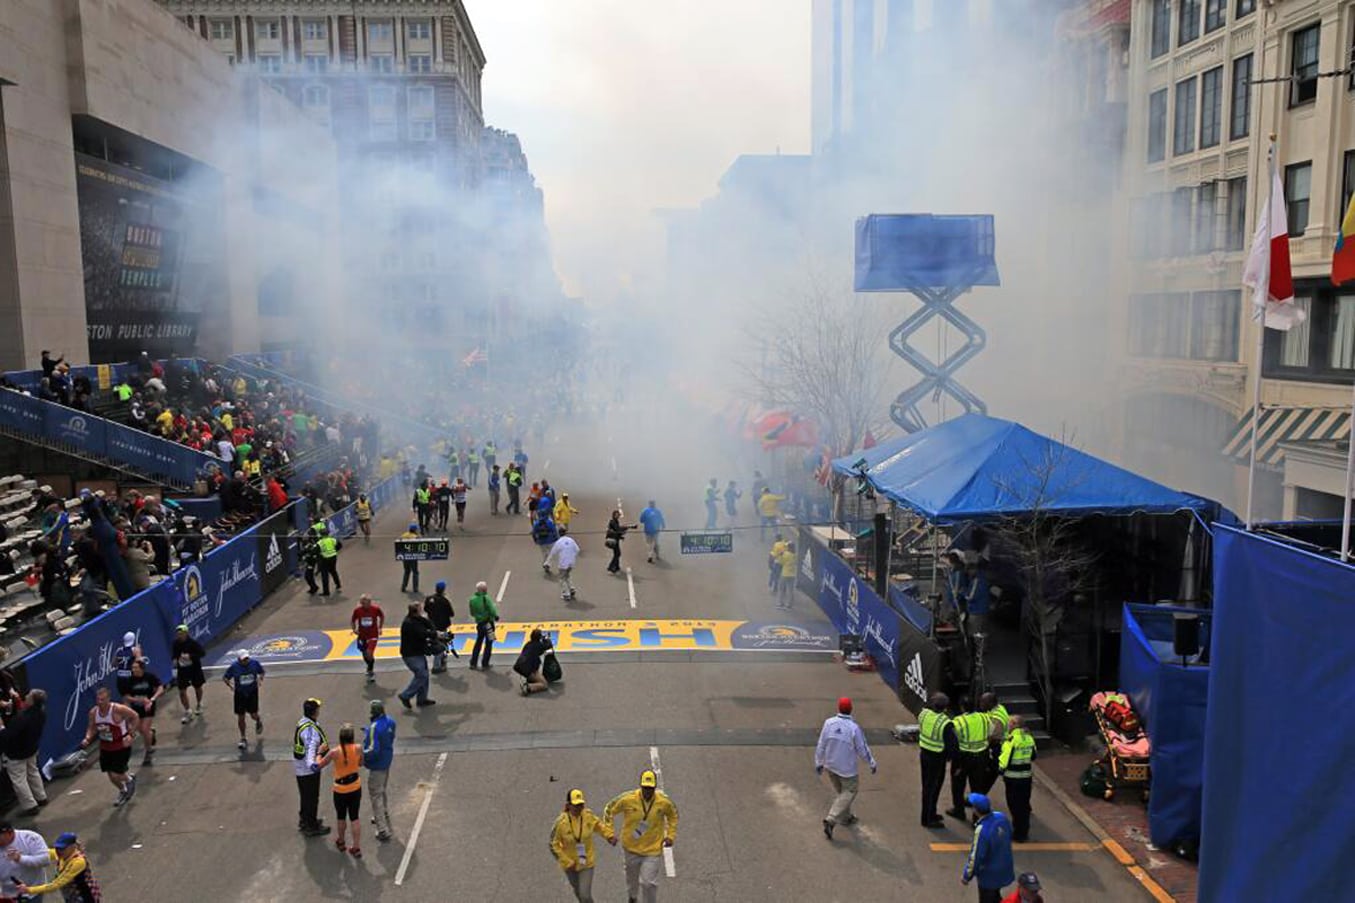 US official: 2 more explosives found at marathon. 